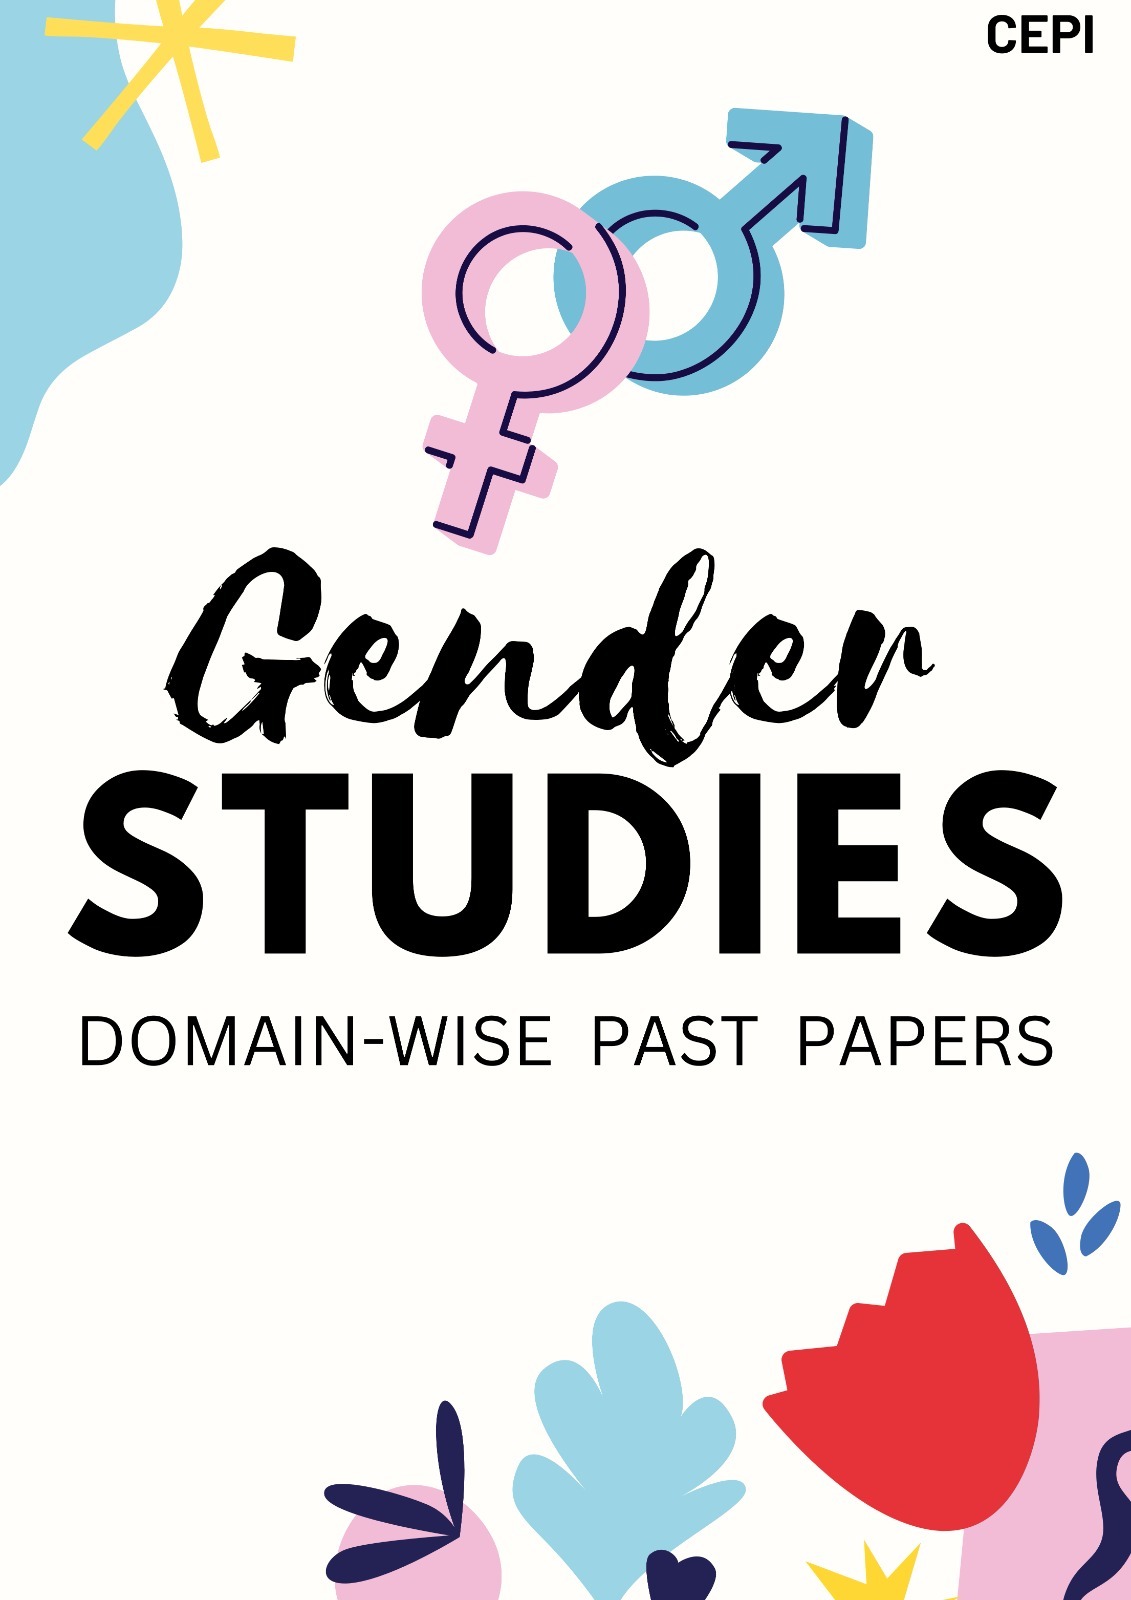 OG5-1 CSS Gender Studies (Past Papers / Domain-wise)